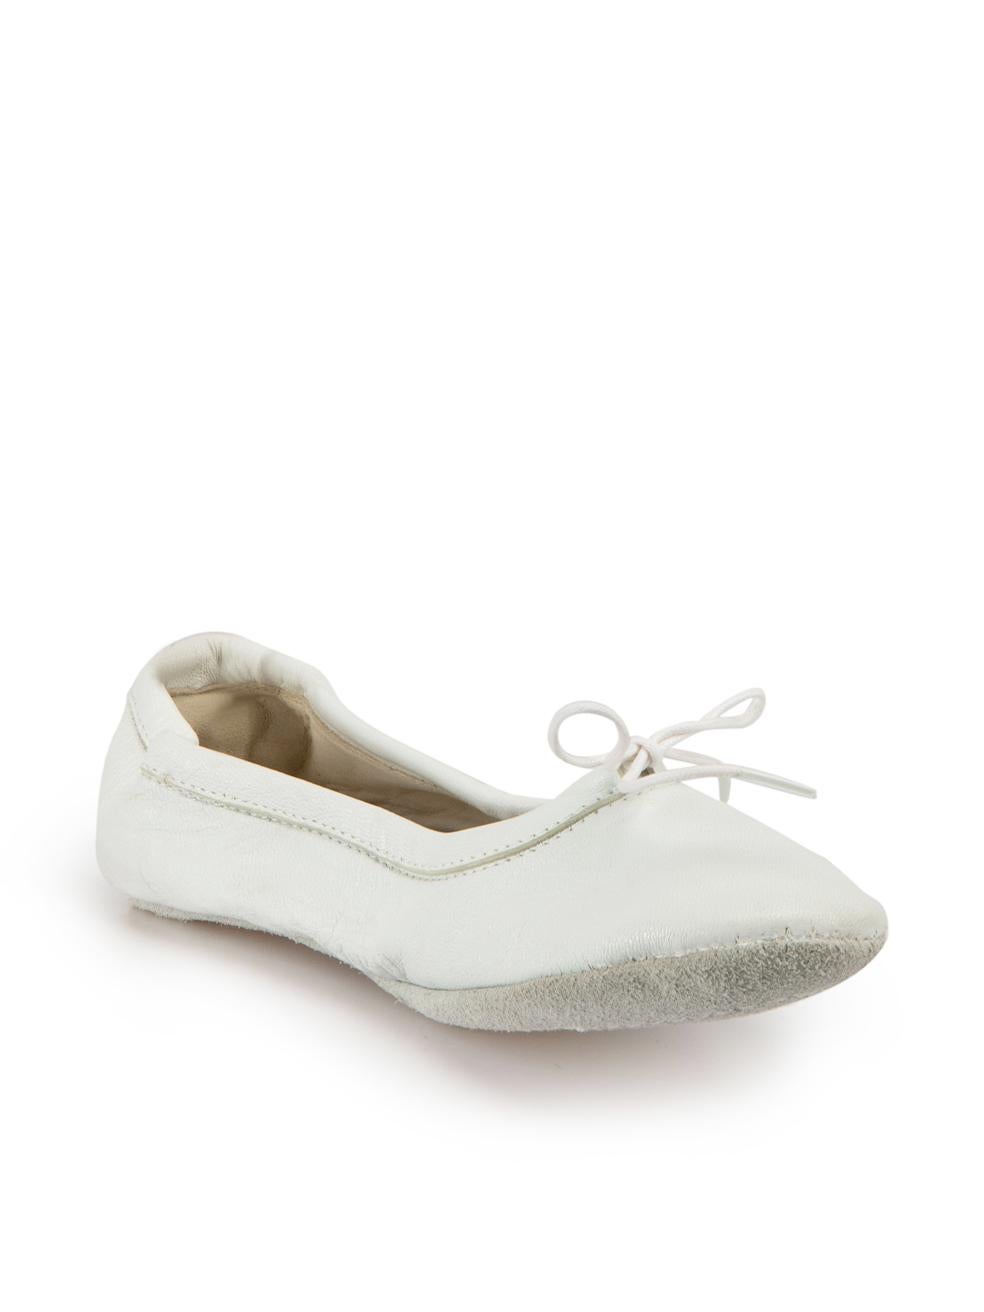 CONDITION is Very good. Hardly any visible wear to shoes evident on this used Maison Martin Margiela designer resale item.



Details


White

Leather

Ballet flats

Slip-on

Round-toe

Bow detail on the front

Small bag with zip fastening

1x Main